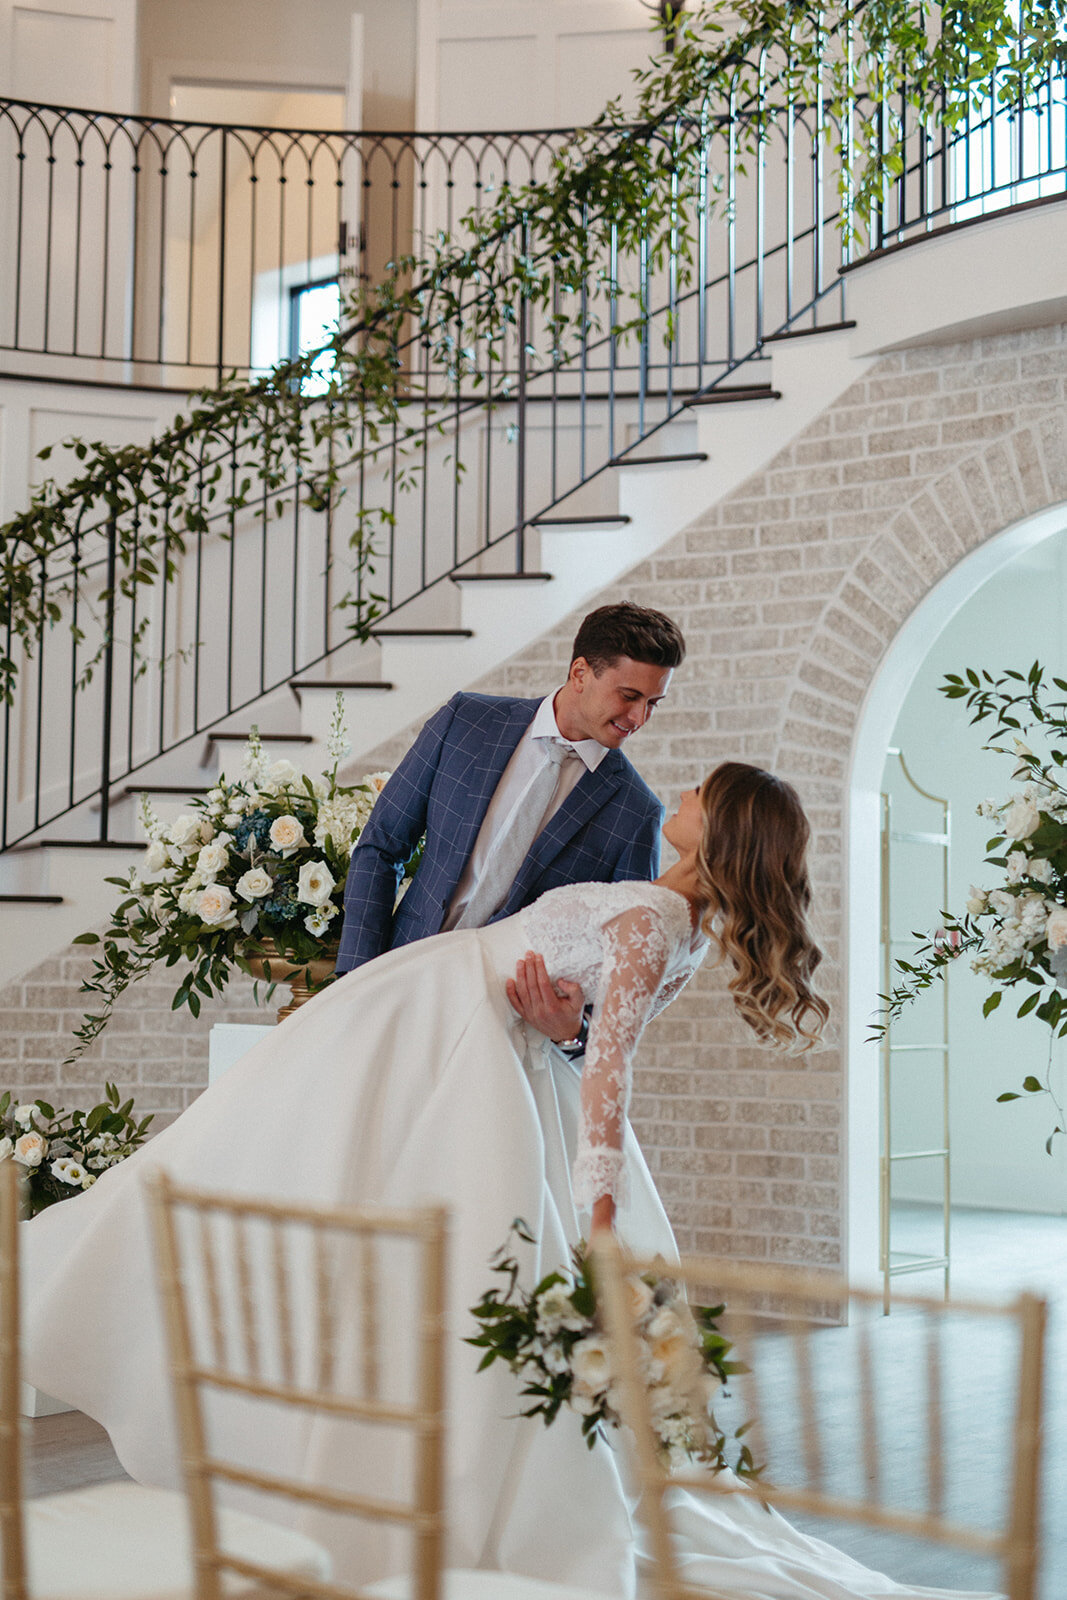 A groom in a blue suit dips his bride wearing a white wedding gown in front of an arched brick entryway with flowers.